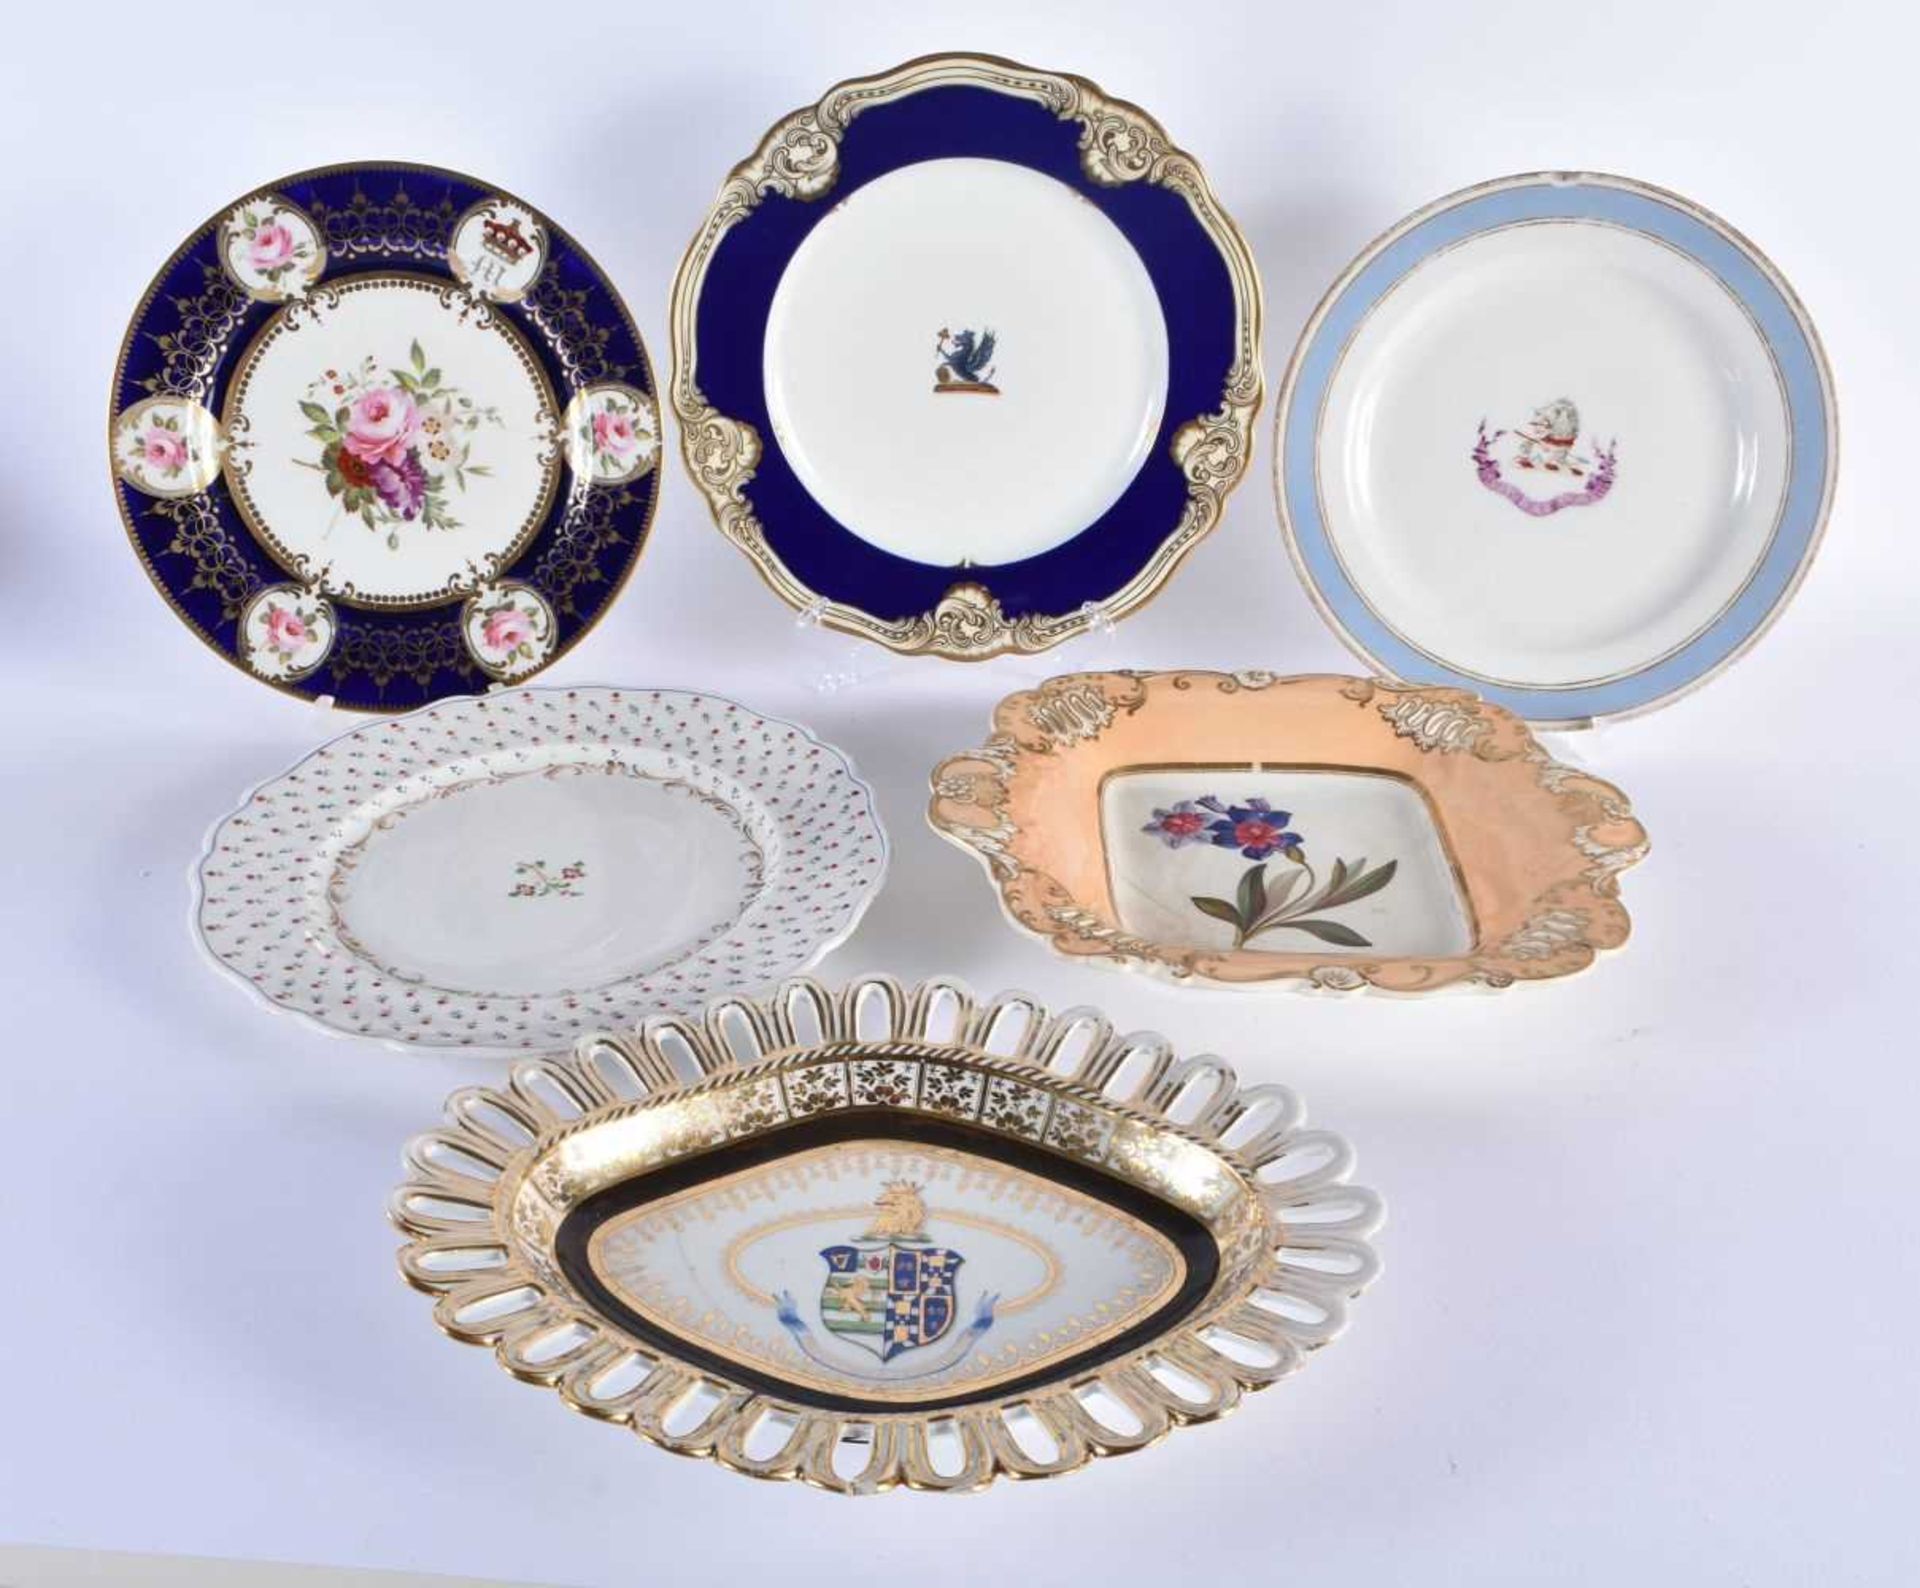 A GROUP OF LATE 18TH/19TH CENTURY CHAMBERLAINS & OTHER WORCESTER WARES including a reticulated